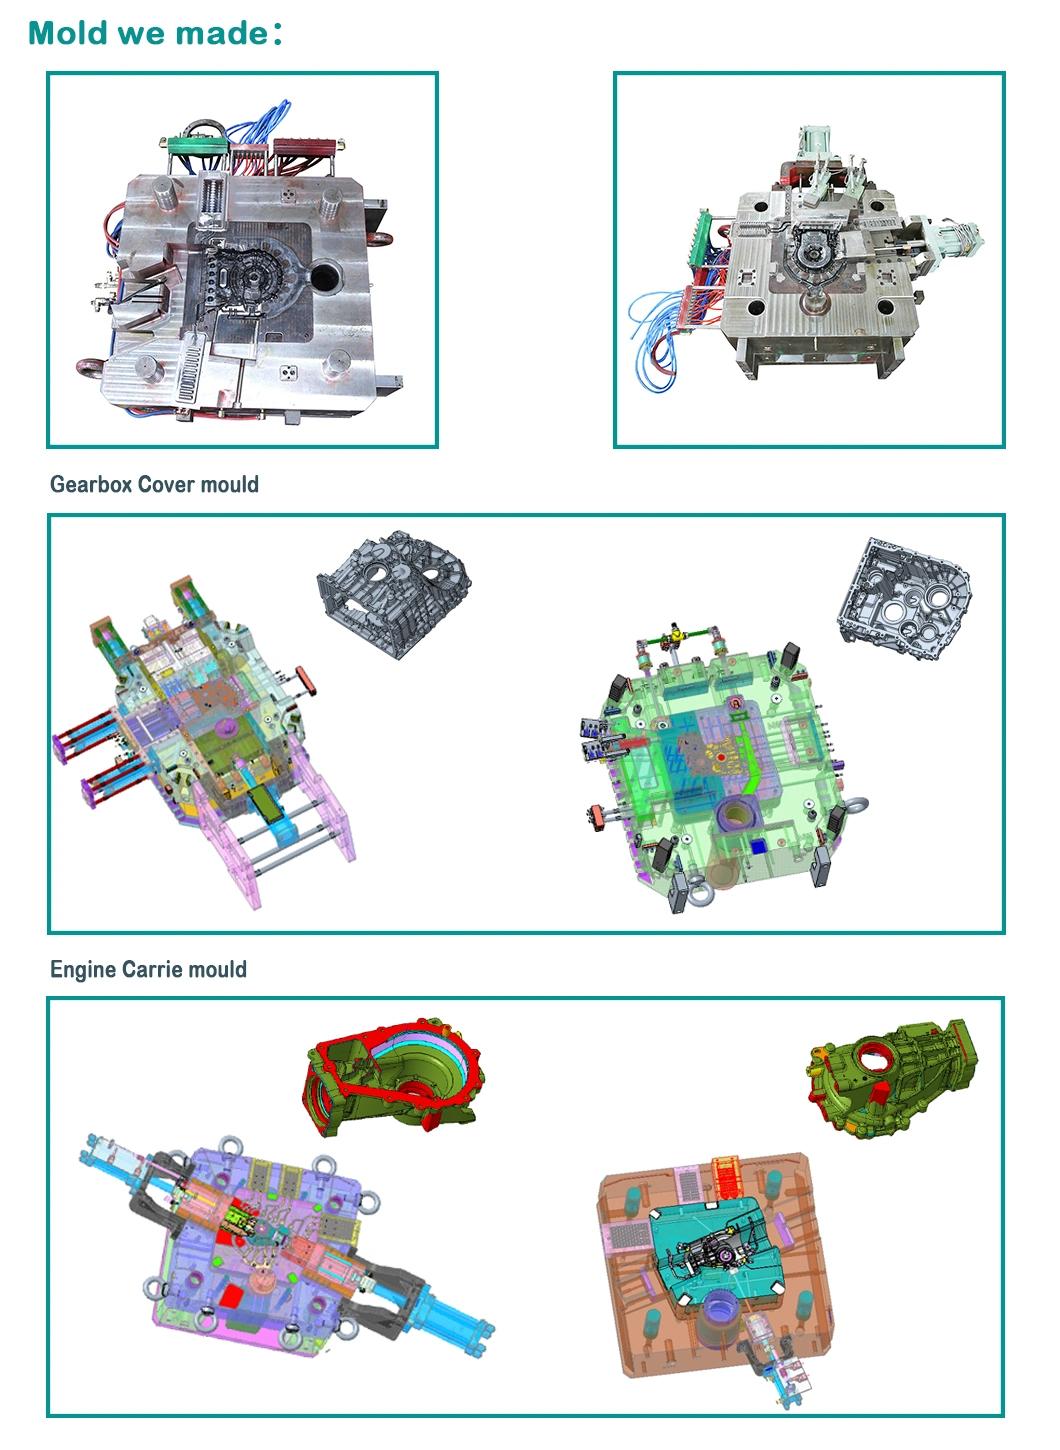 OEM High Quality Plastic Mold Die Casting Die Die Casting Mold Injection Mold for Auto